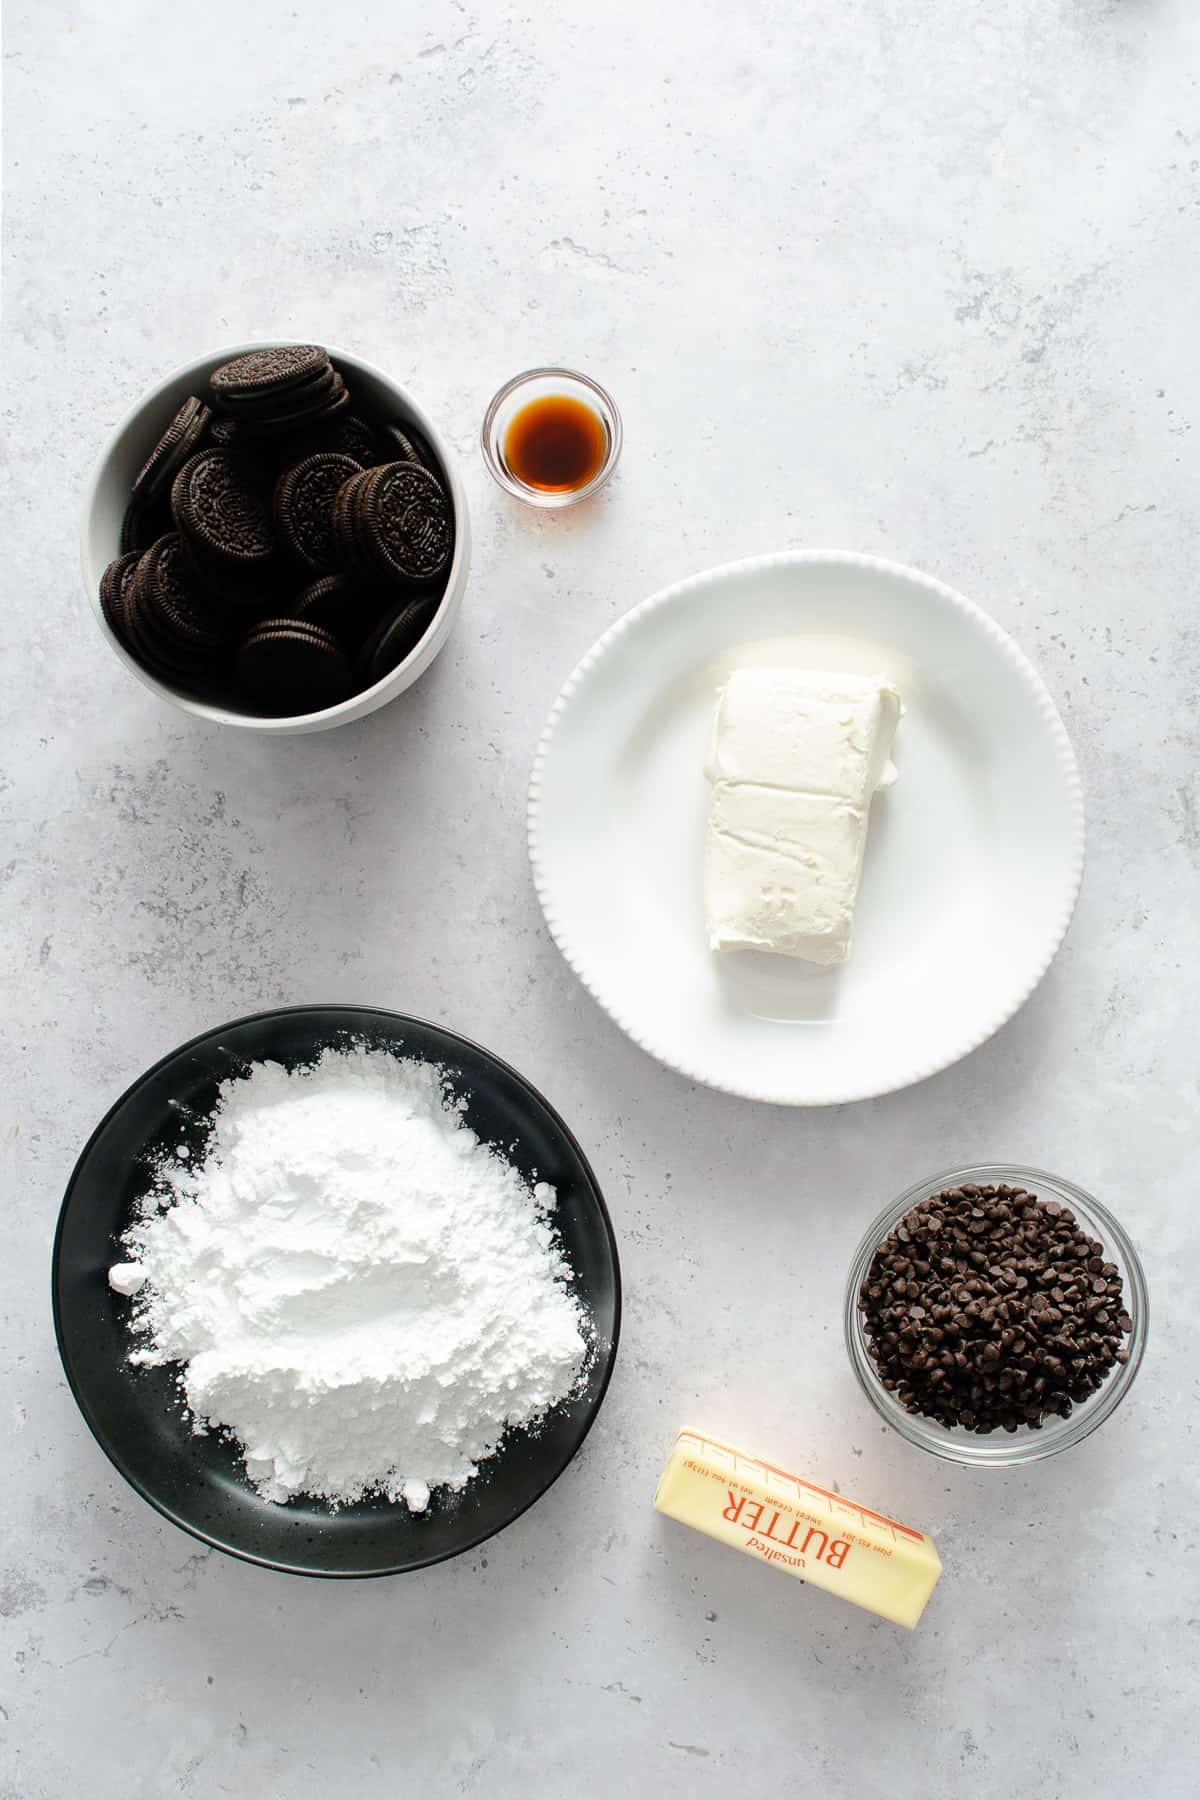 Ingredients for making a cookies & cream dessert cheese ball.